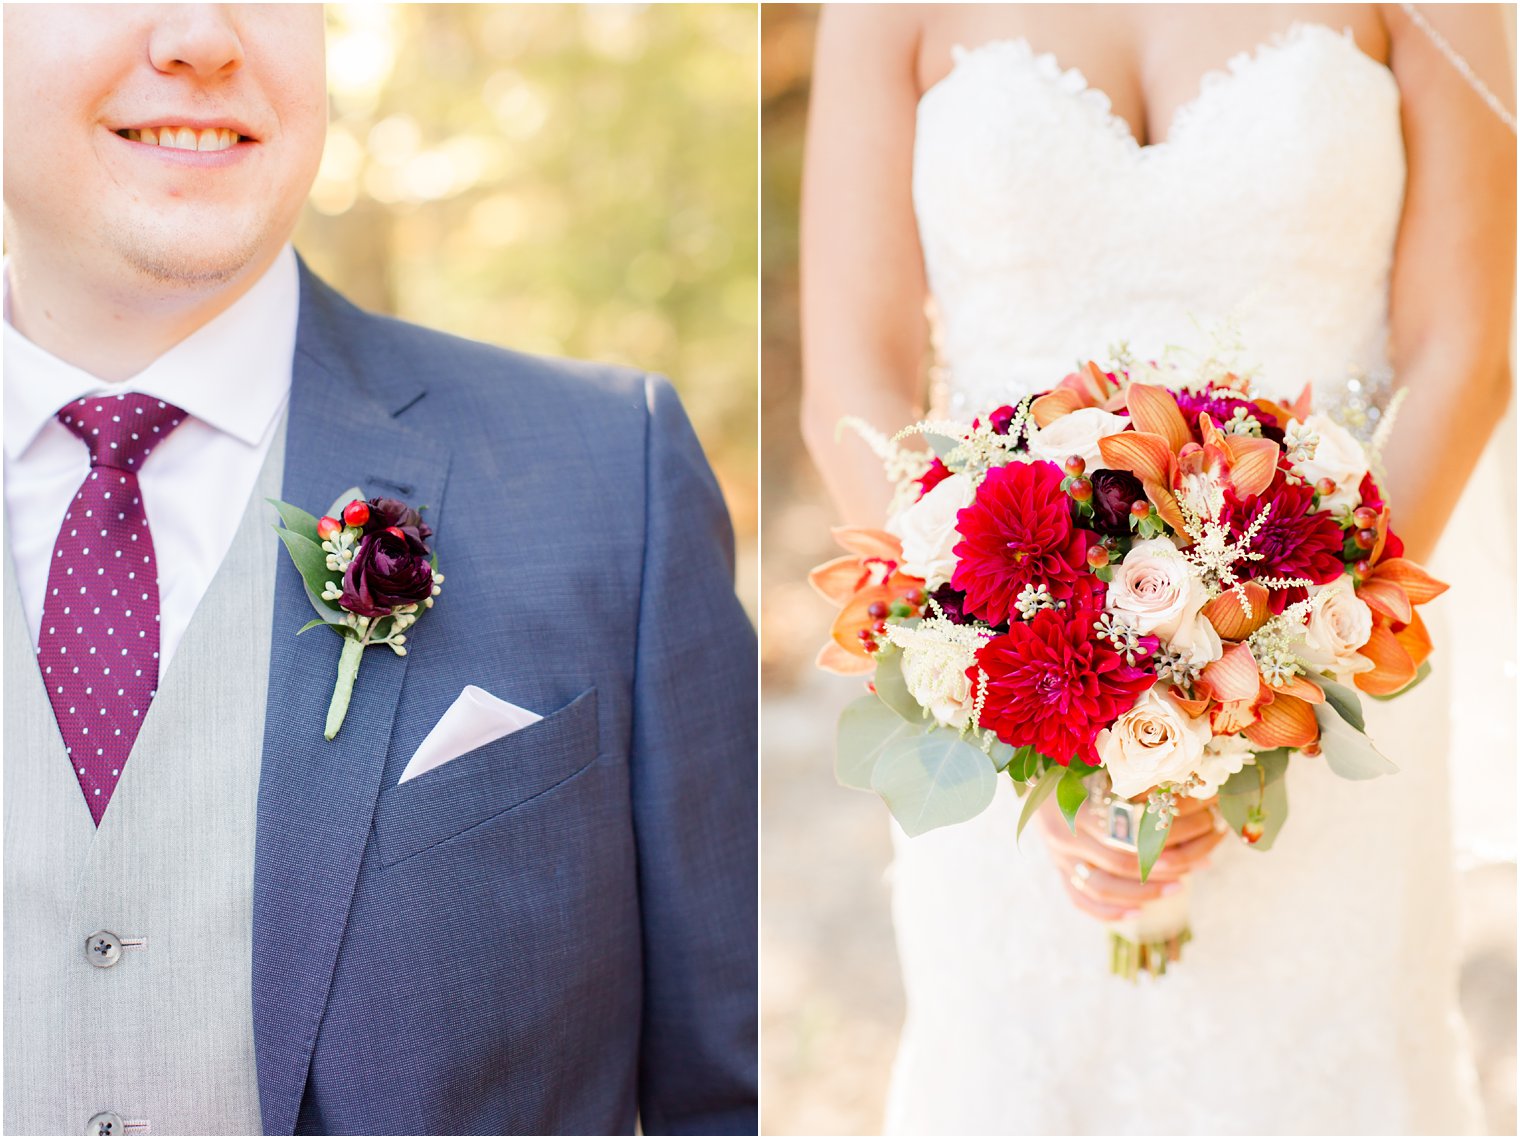 Boutonniere and bouquet by Sayrewoods Florist | Photos by NJ Wedding Photographers Idalia Photography